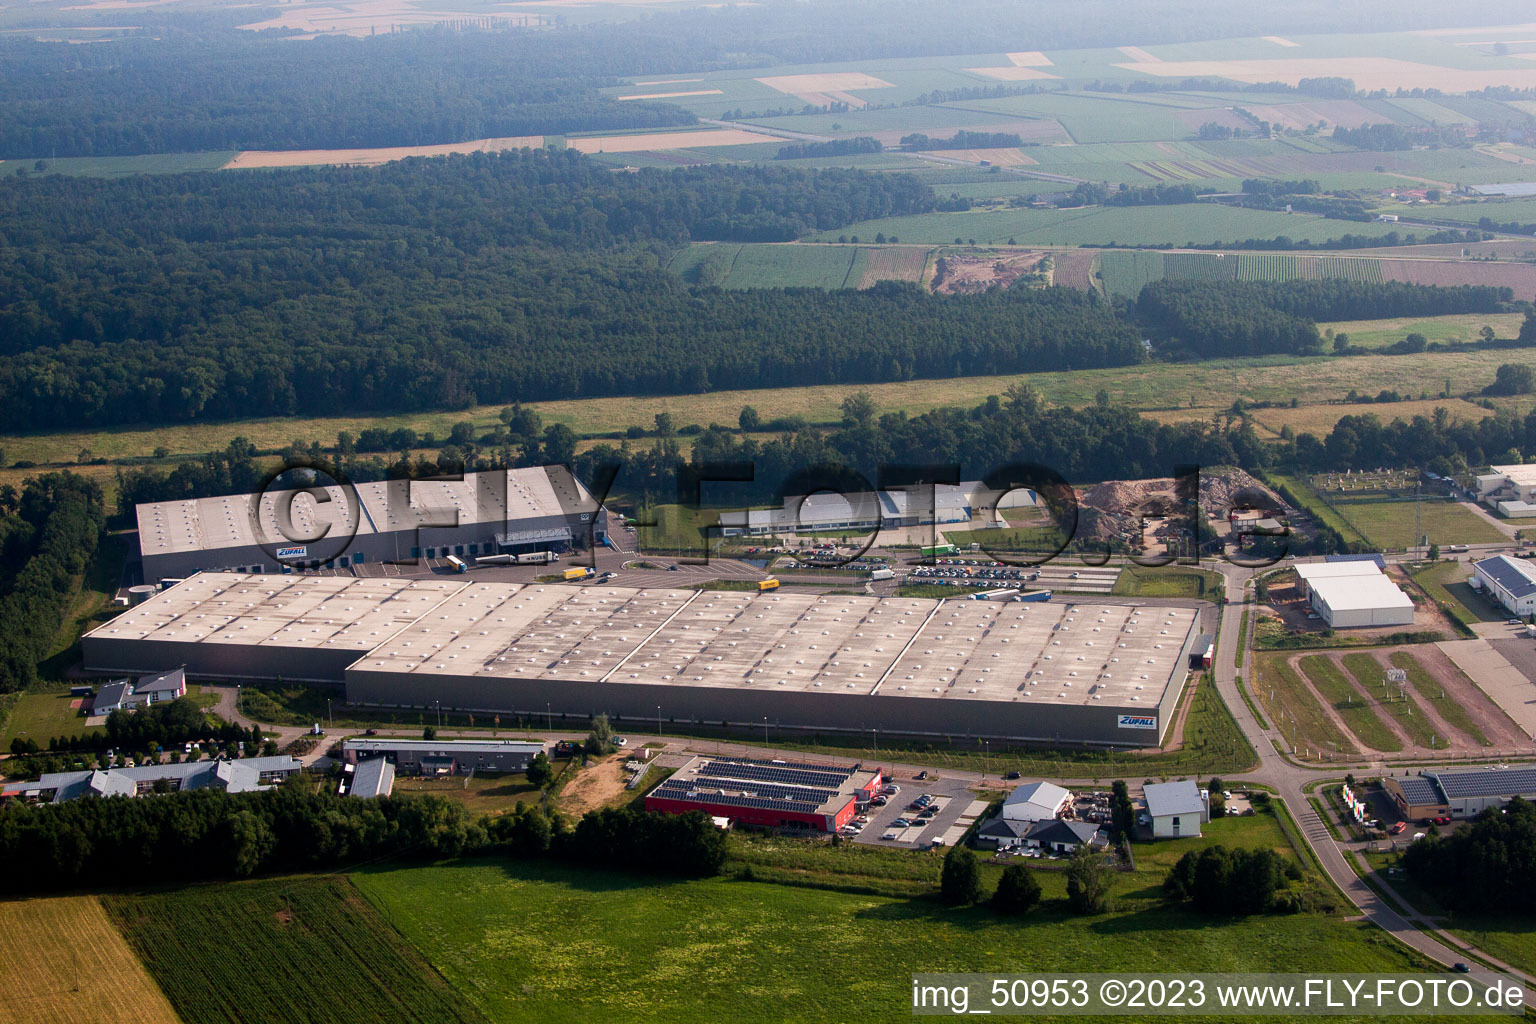 Horst industrial area, coincidence logistics center in the district Minderslachen in Kandel in the state Rhineland-Palatinate, Germany seen from above